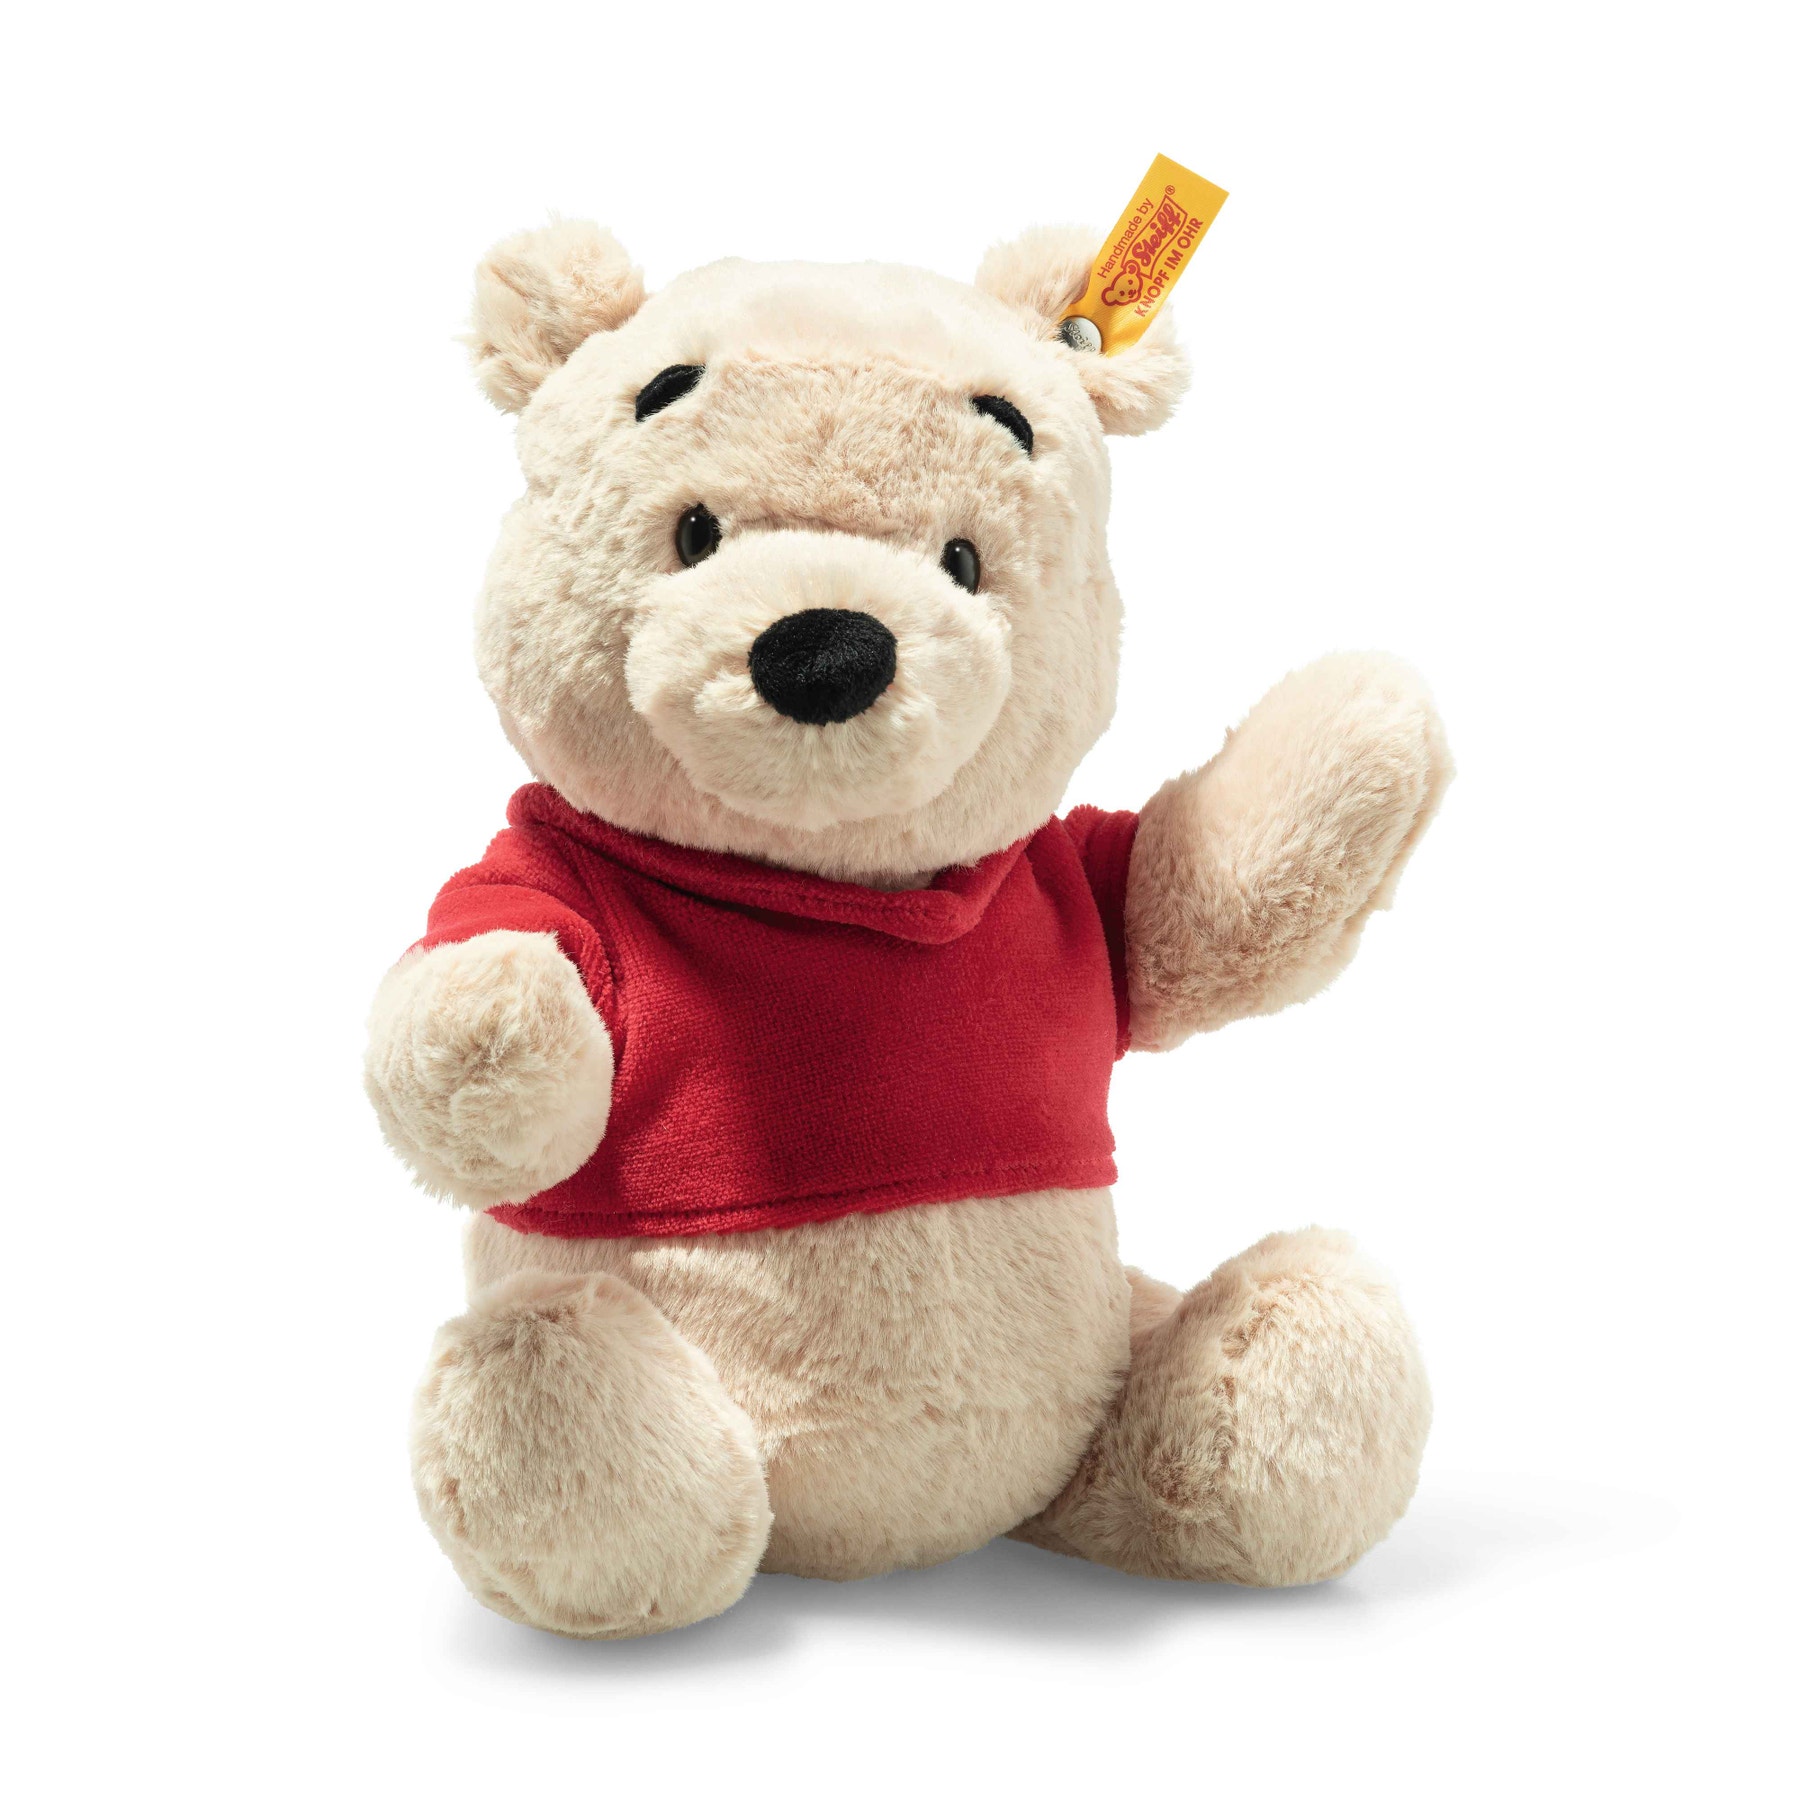 Winnie The Pooh Plush Toy: Join the Hundred Acre Journey in Plush!